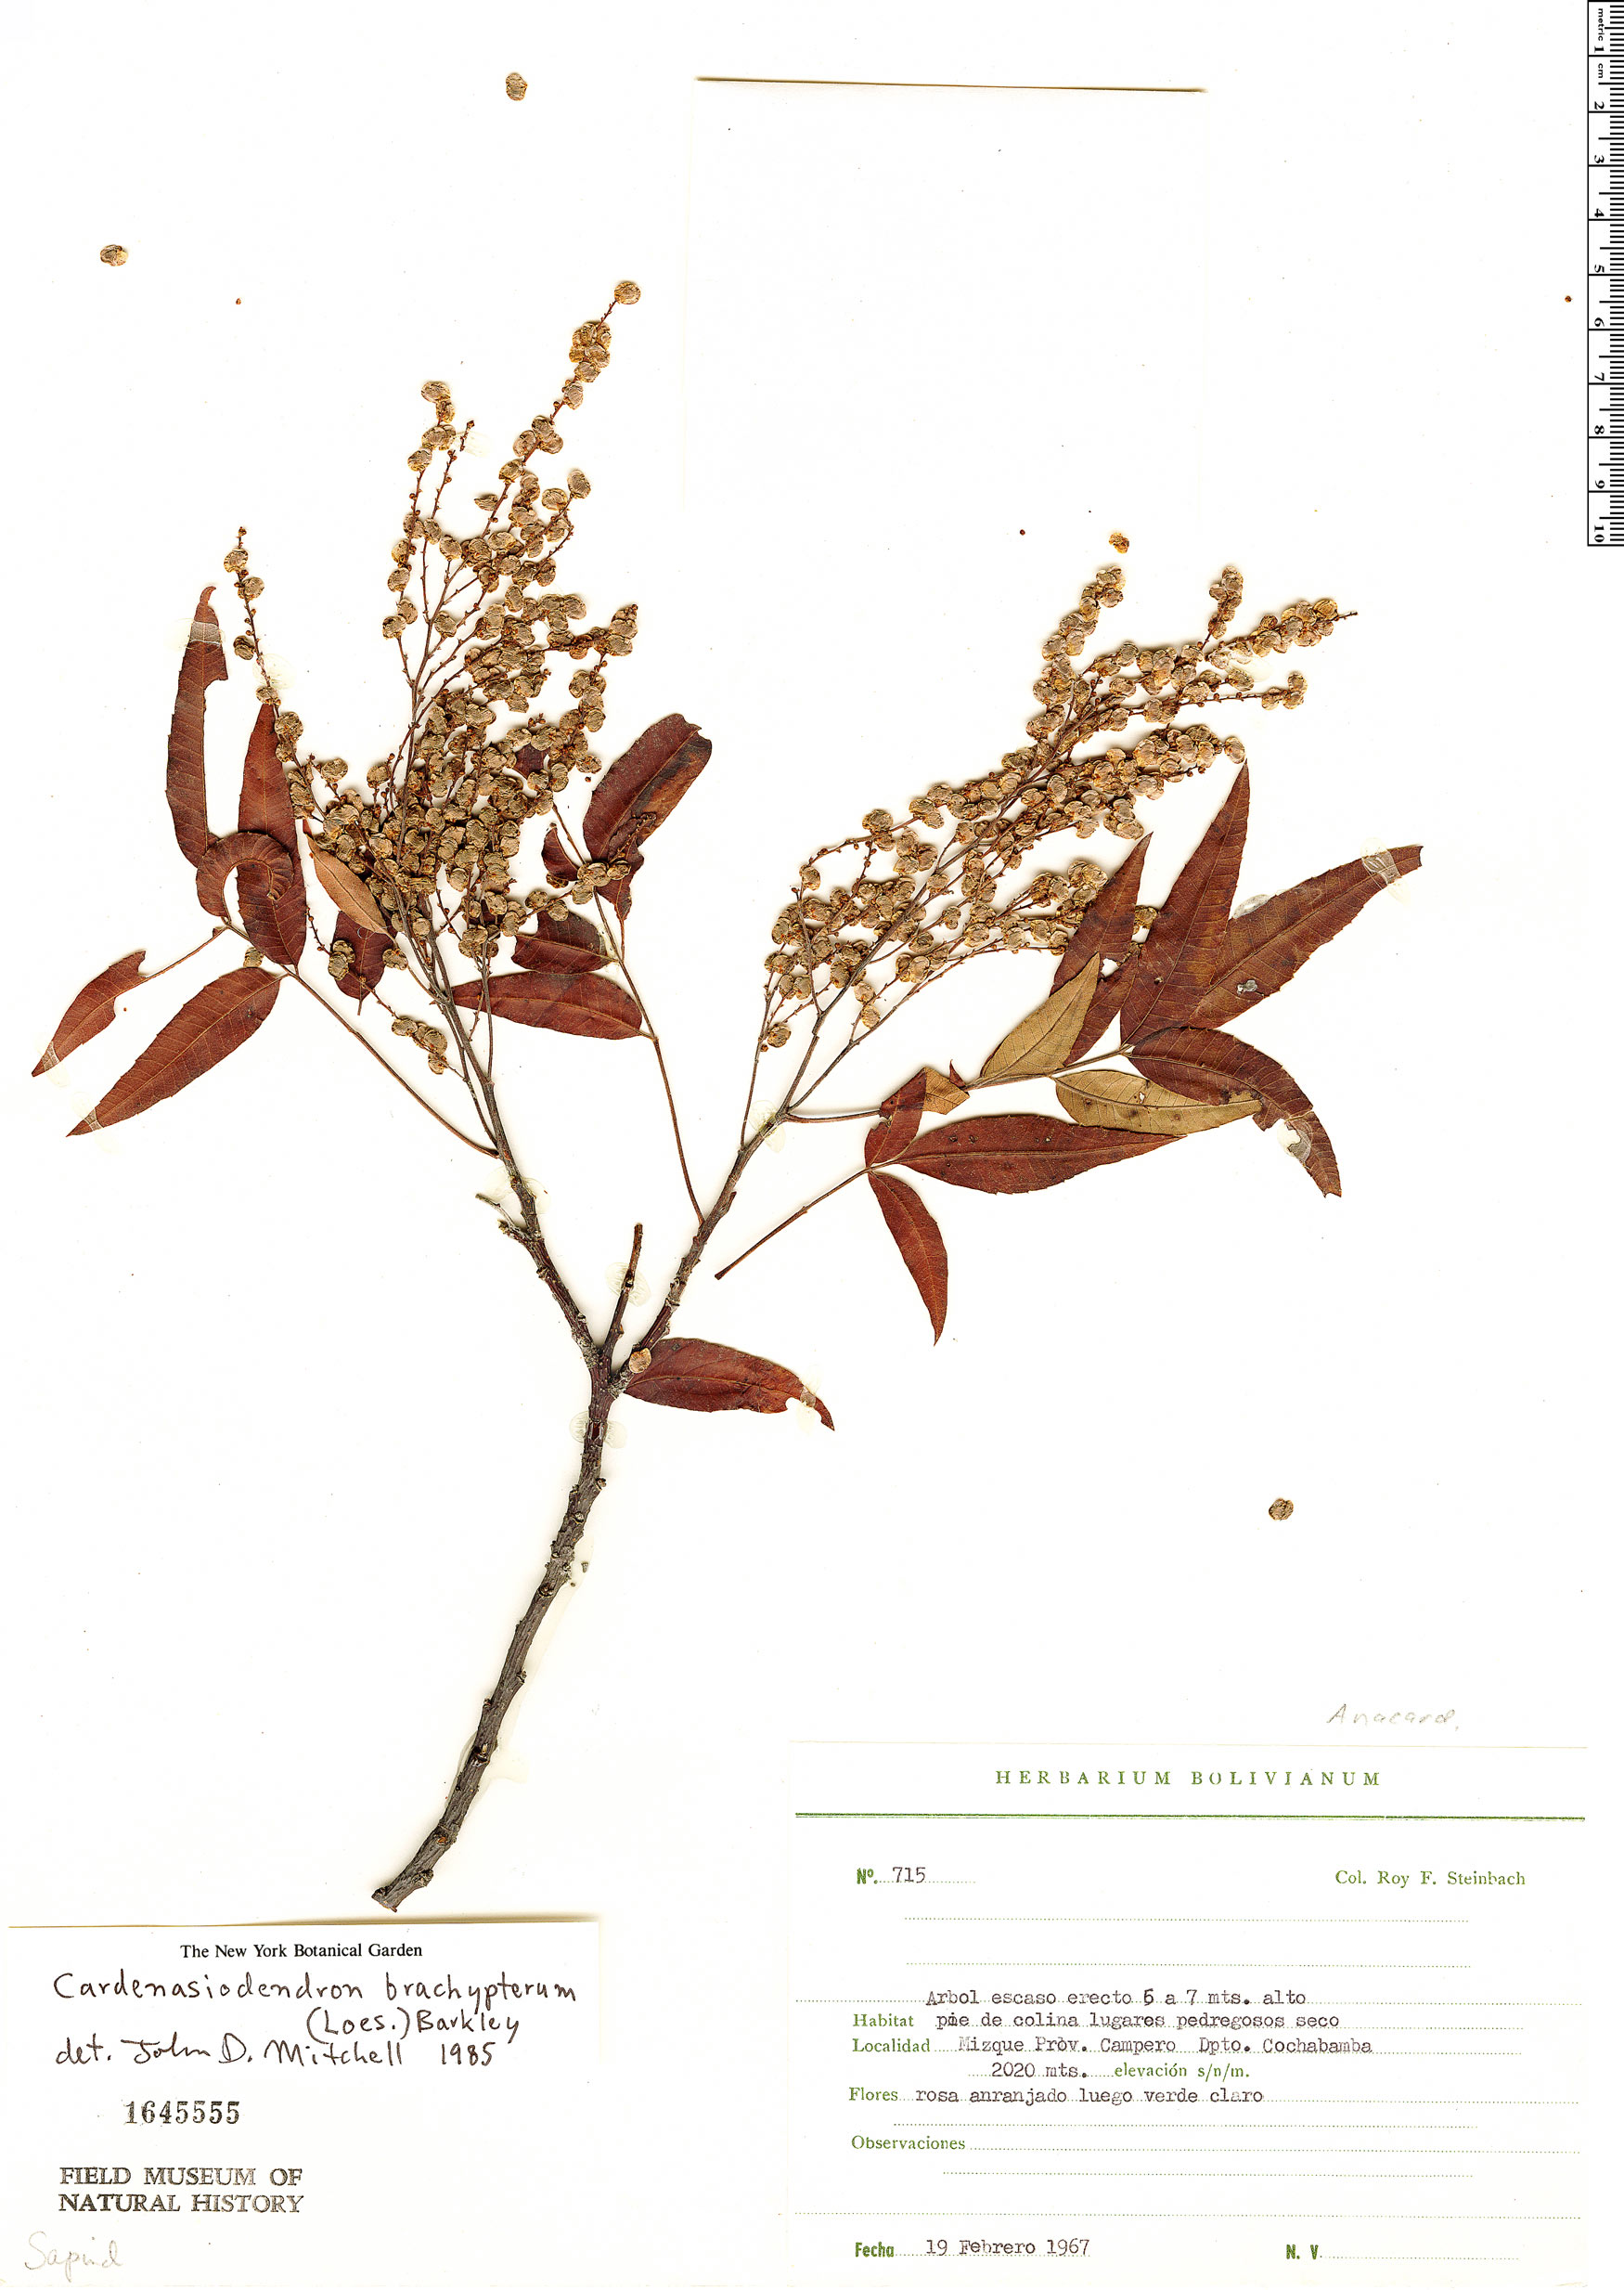 Cardenasiodendron image